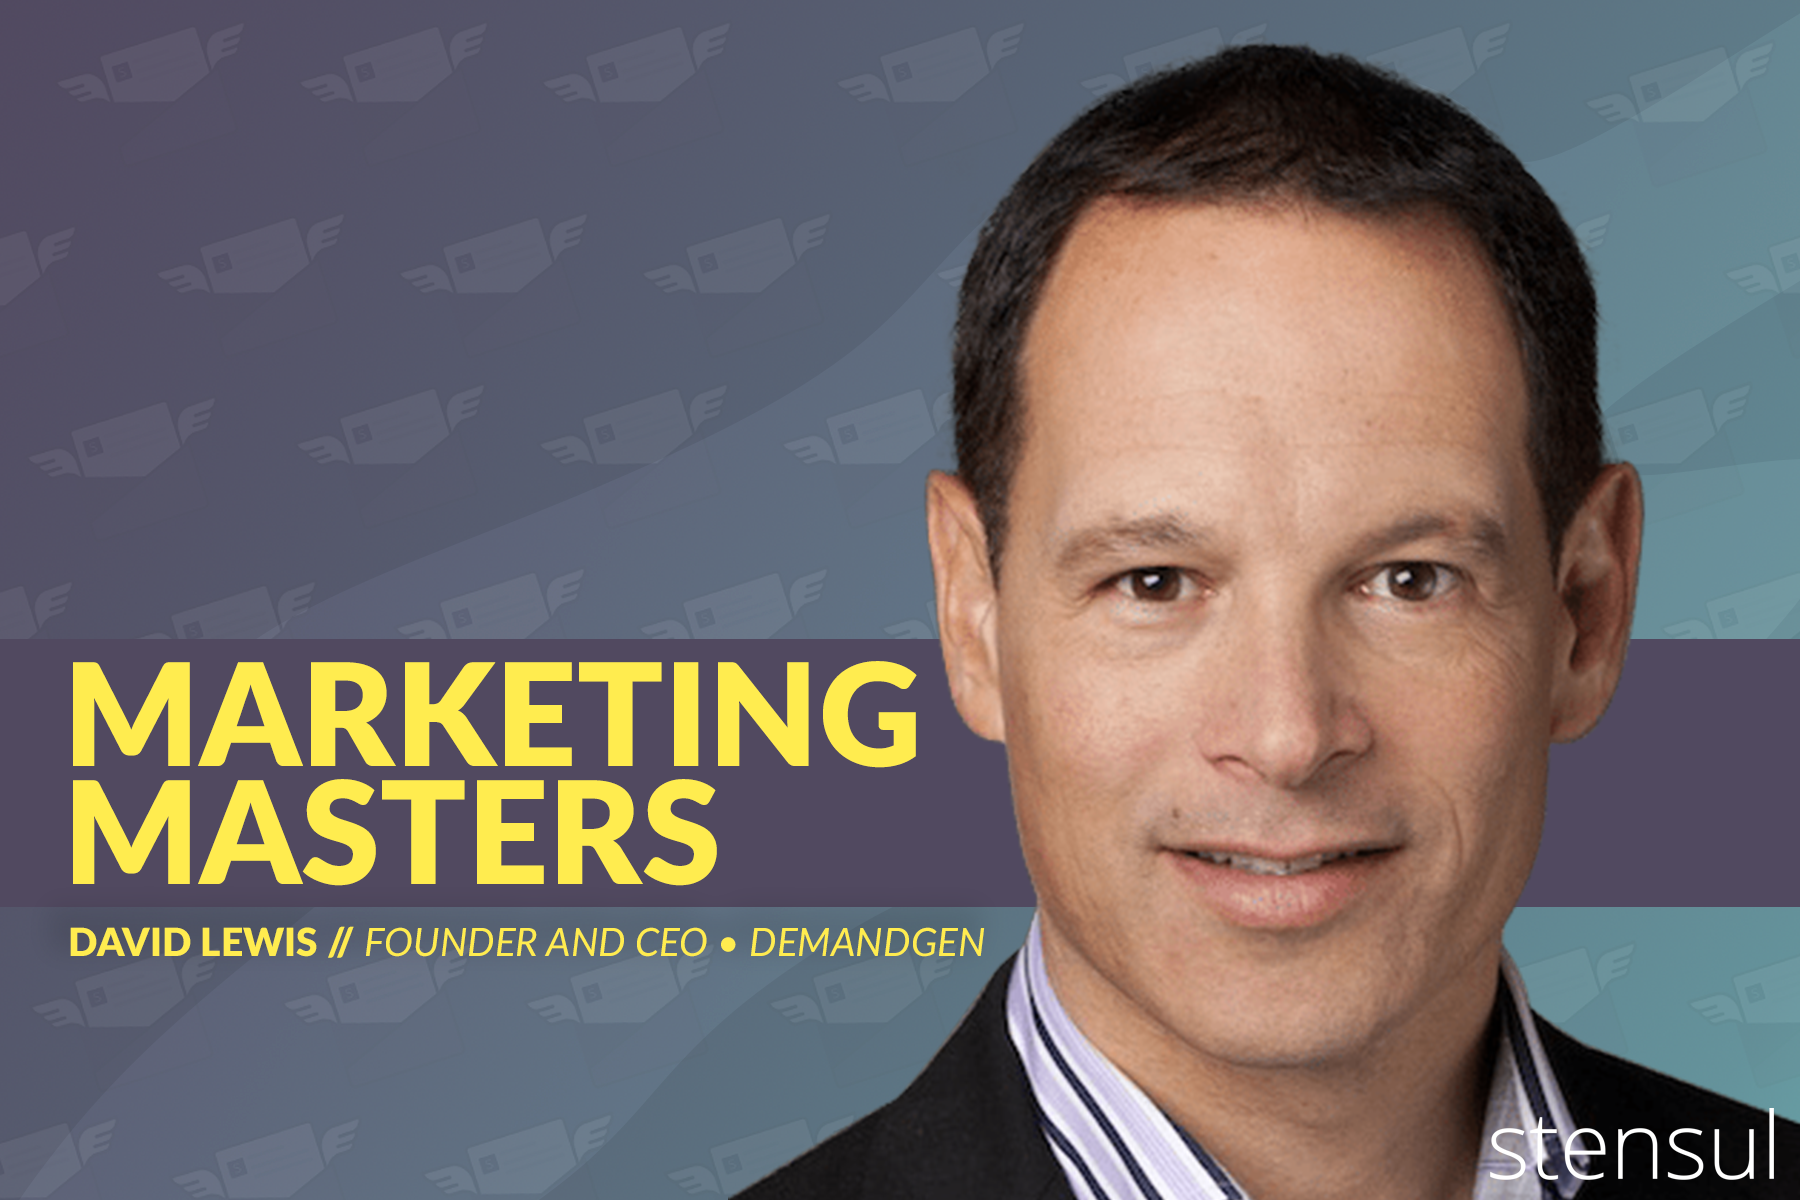 Marketing Masters: Why All Organizations Must Embrace Change to Succeed: An Interview with David Lewis